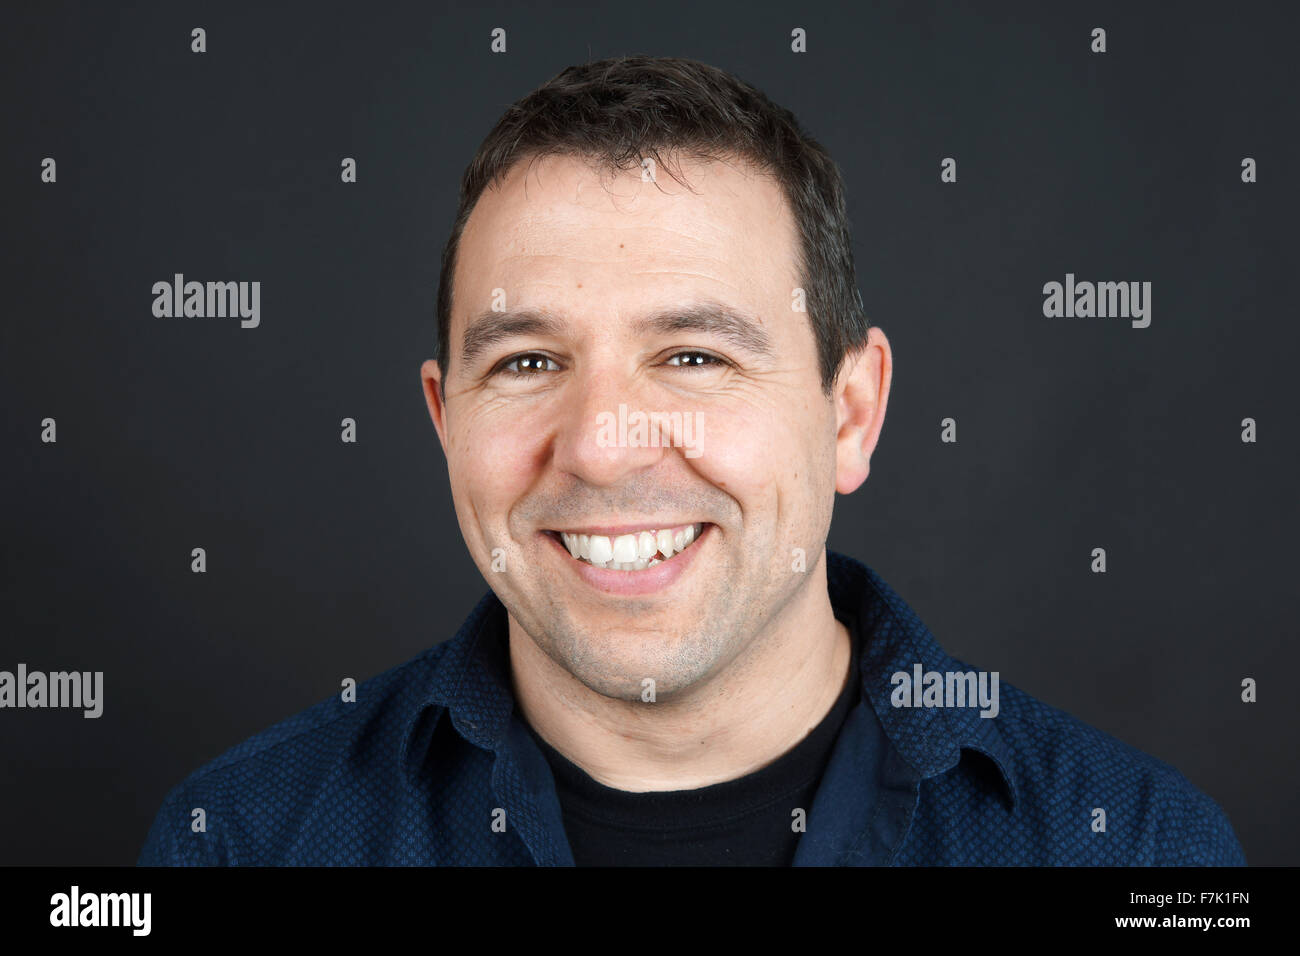 Candid portrait of friendly smiling man, natural concept Stock Photo